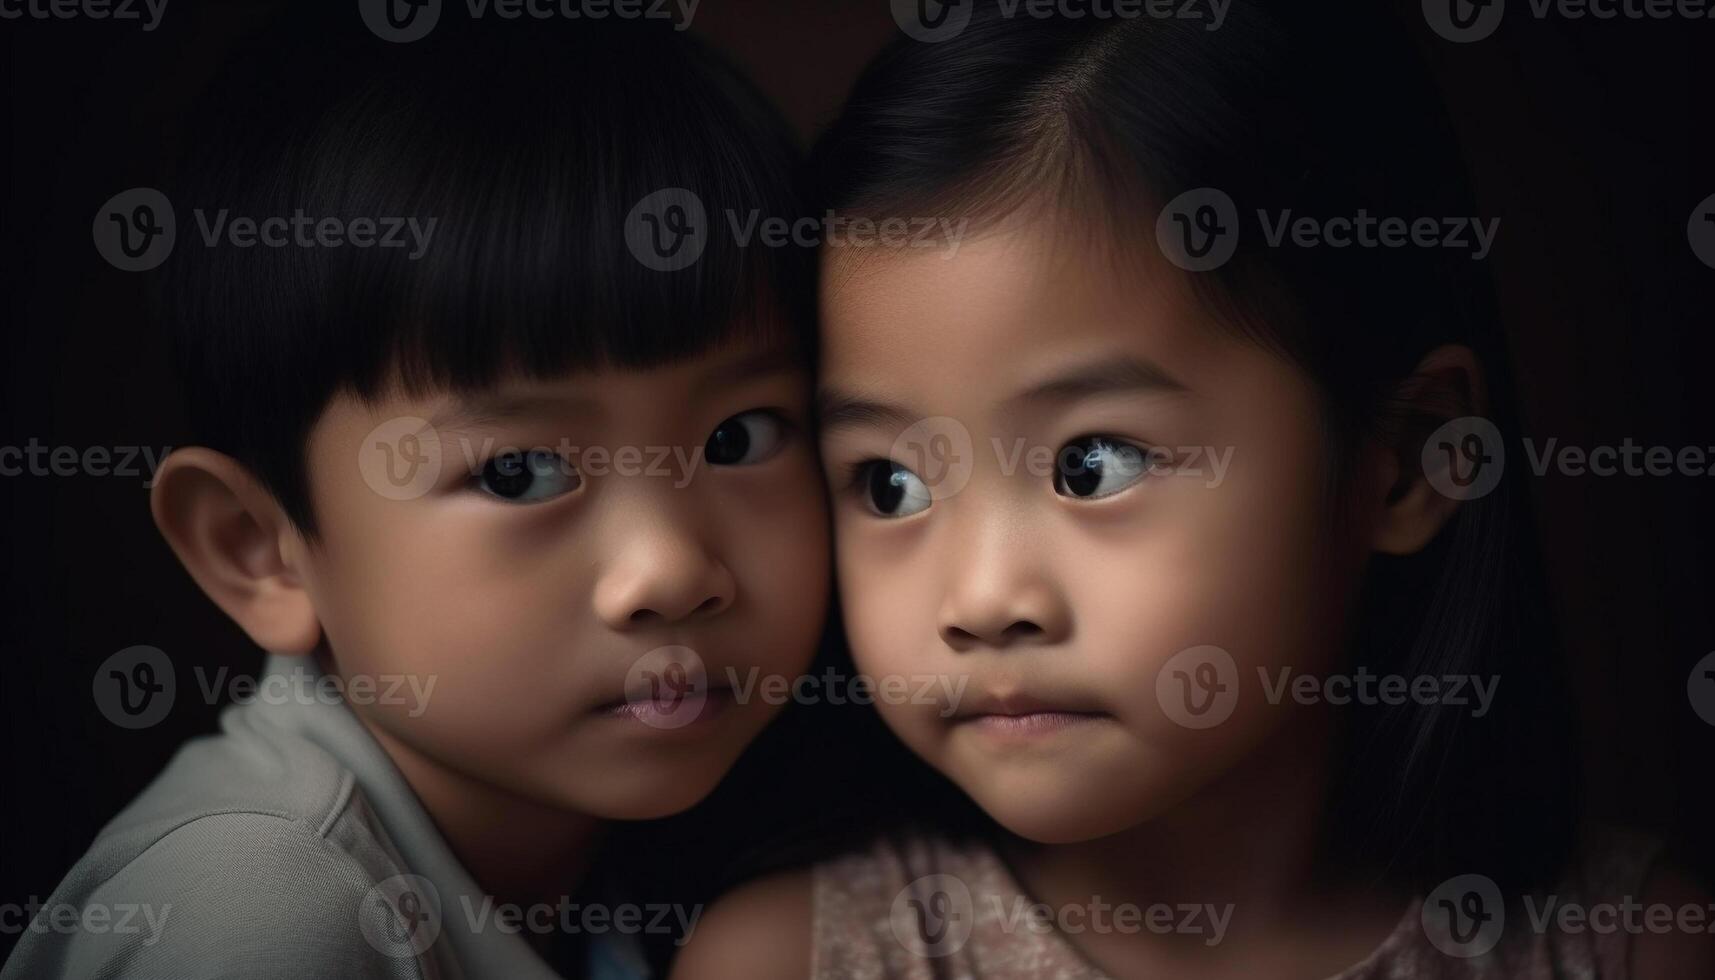 Smiling siblings of different ethnicities in a joyful studio portrait generated by AI photo